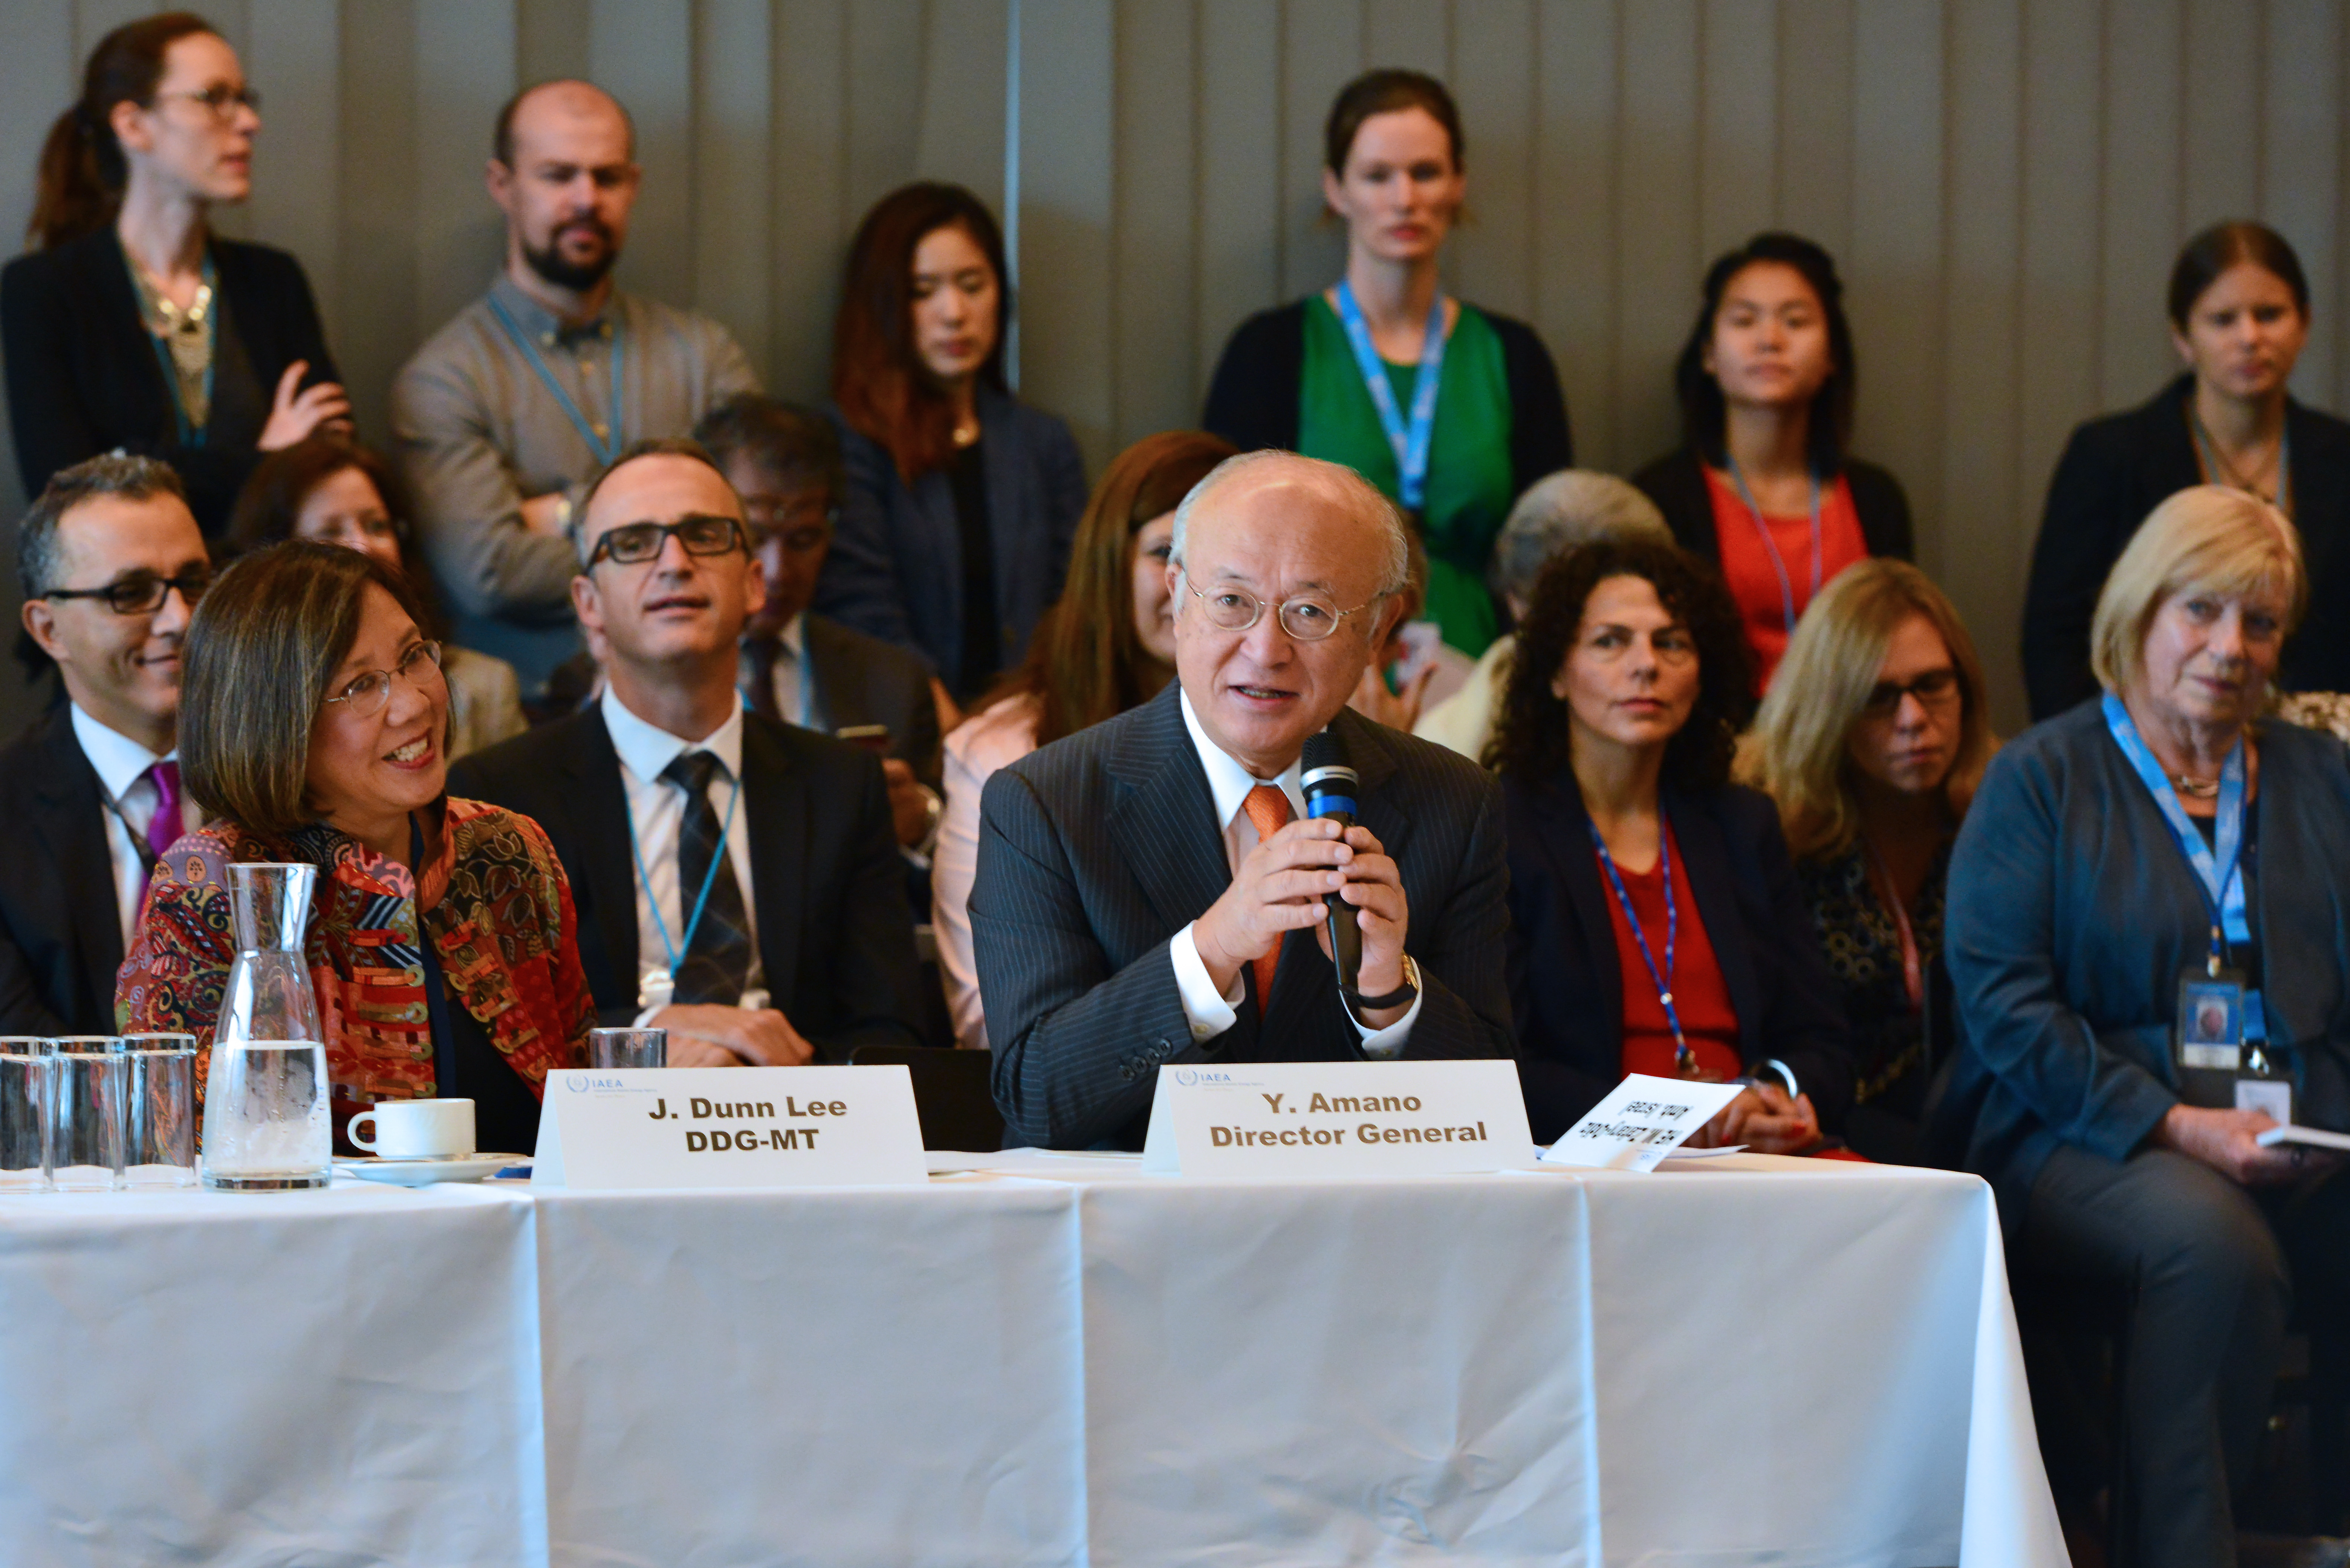 IAEA Director General Yukiya Amano speaks at the “Women in All Things Nuclear” side event Photo credit: IAEA